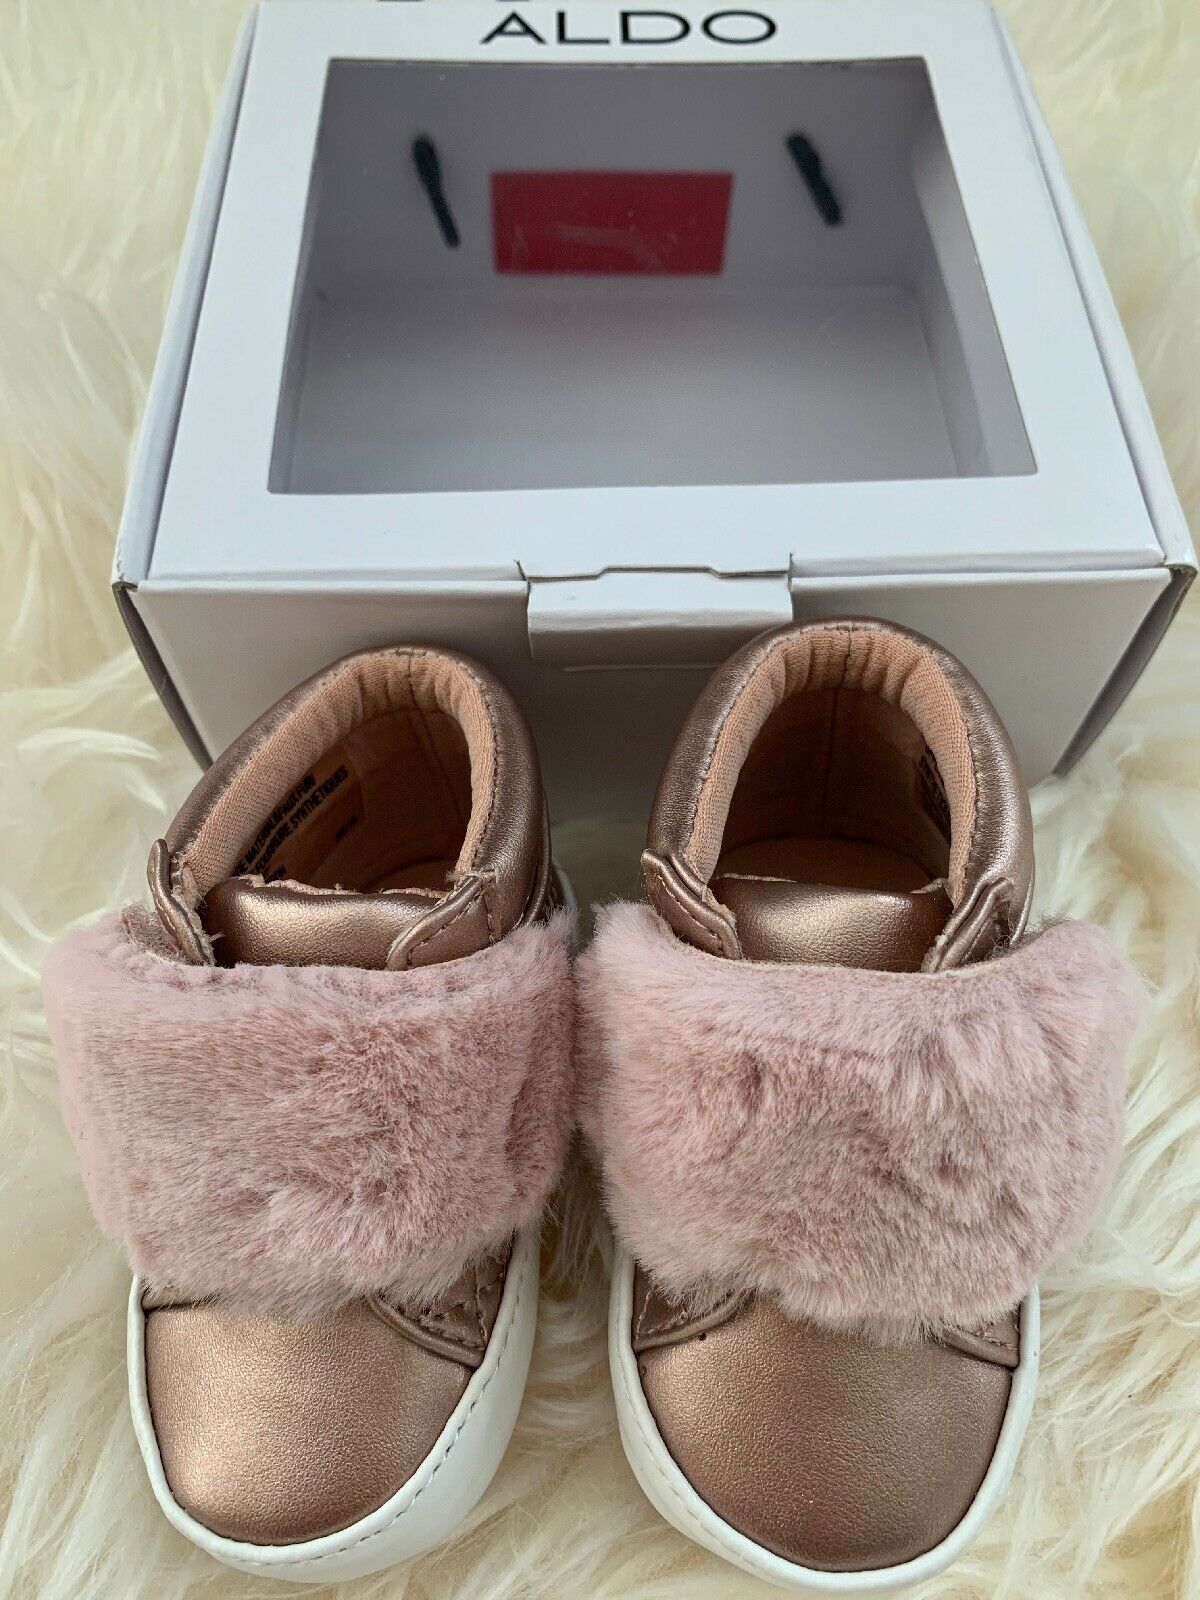 ALDO Baby Girl Peachy Pink Metallic Shoes Size 3 Slip On 6-9 Months Sneakers $35